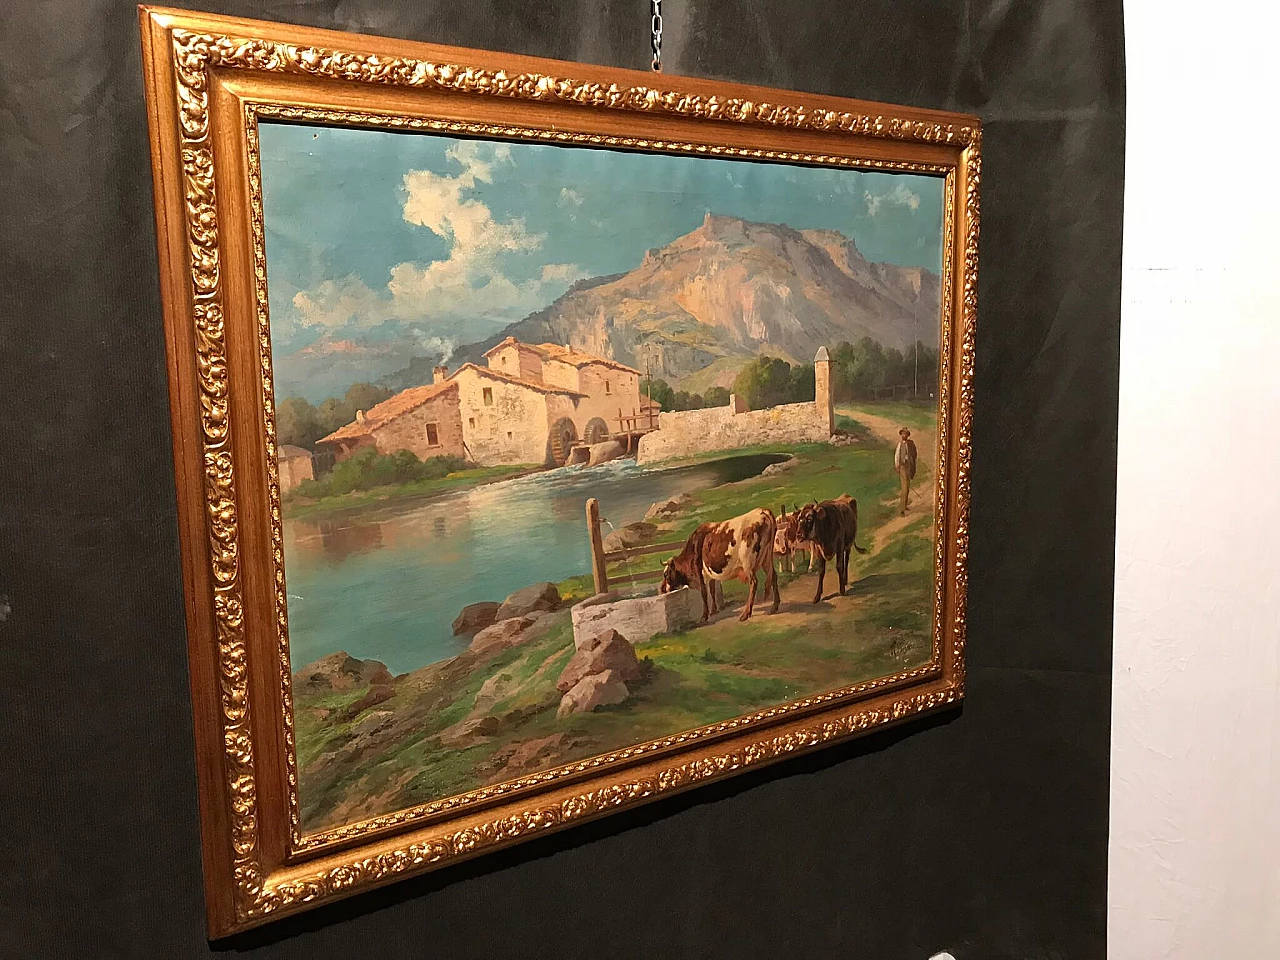 Neapolitan school painting oil on canvas signed R. Rianni, 19th century 1175875